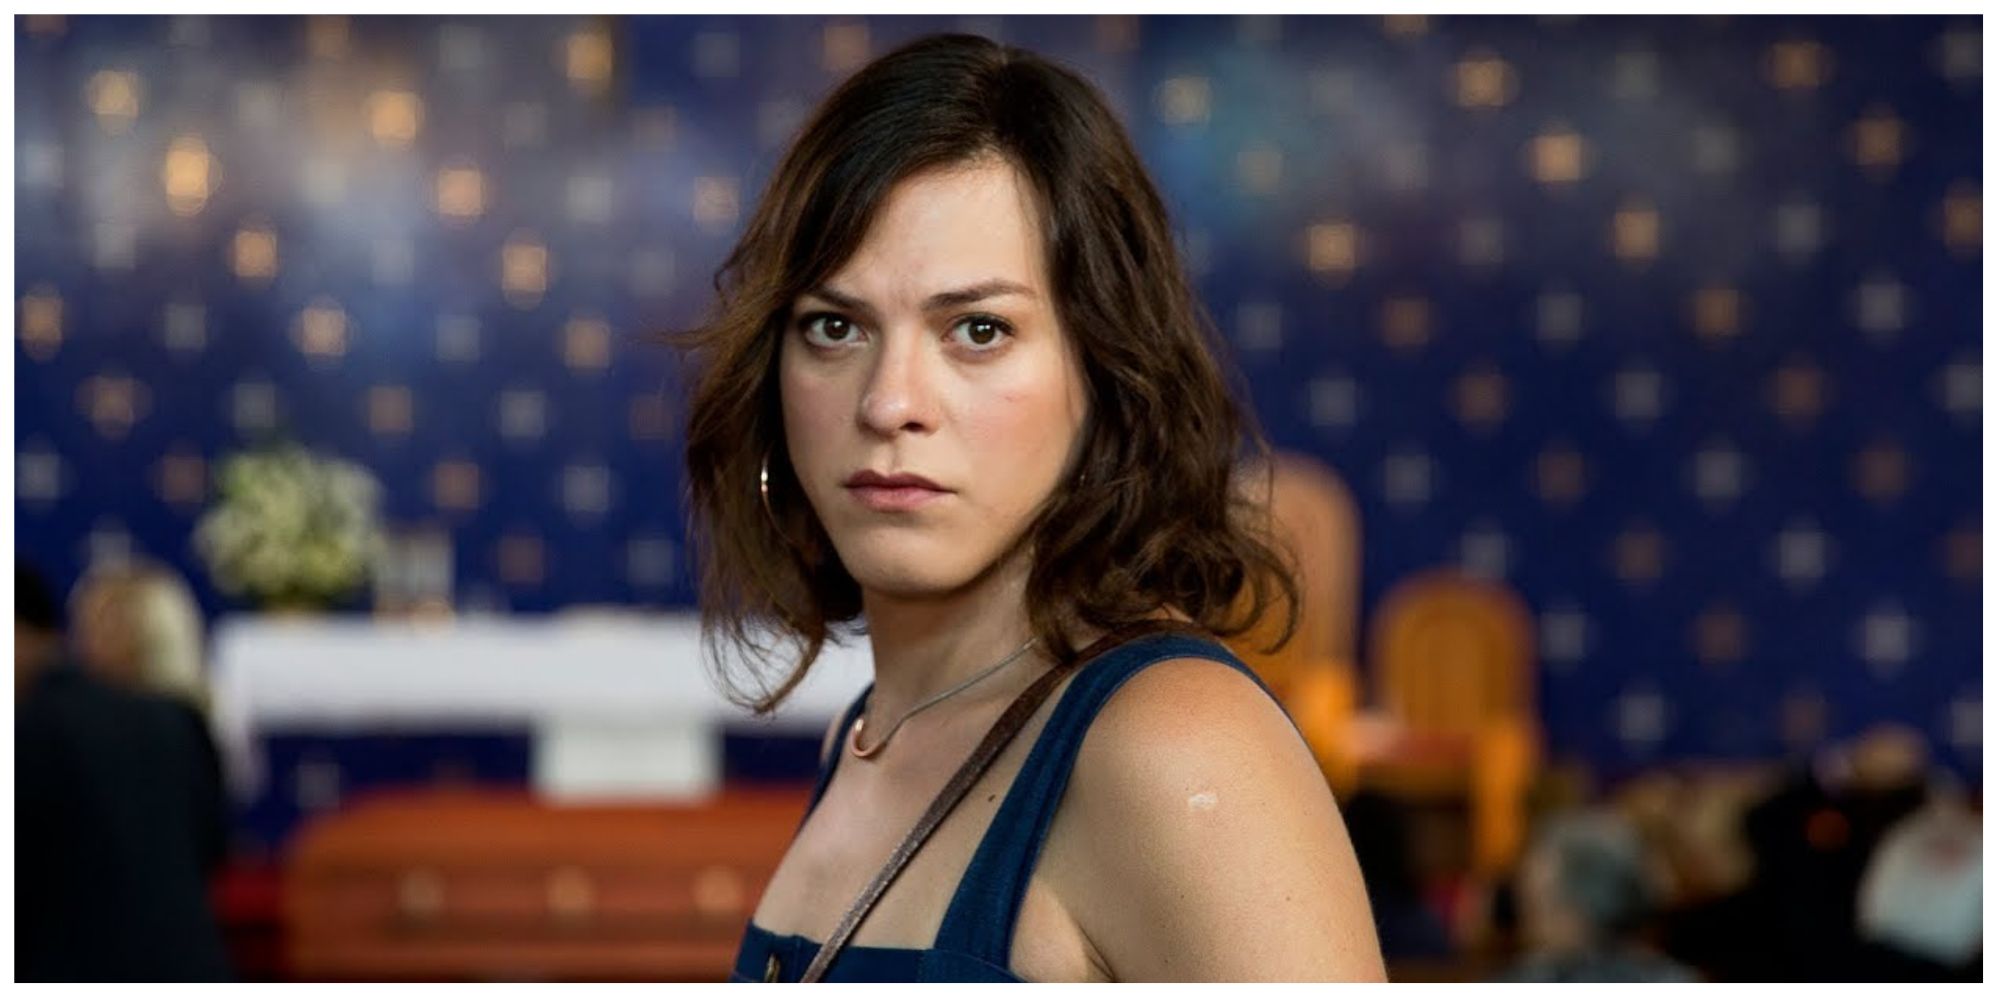 Marina in A Fantastic Woman staring straight ahead with a look of concern on her face